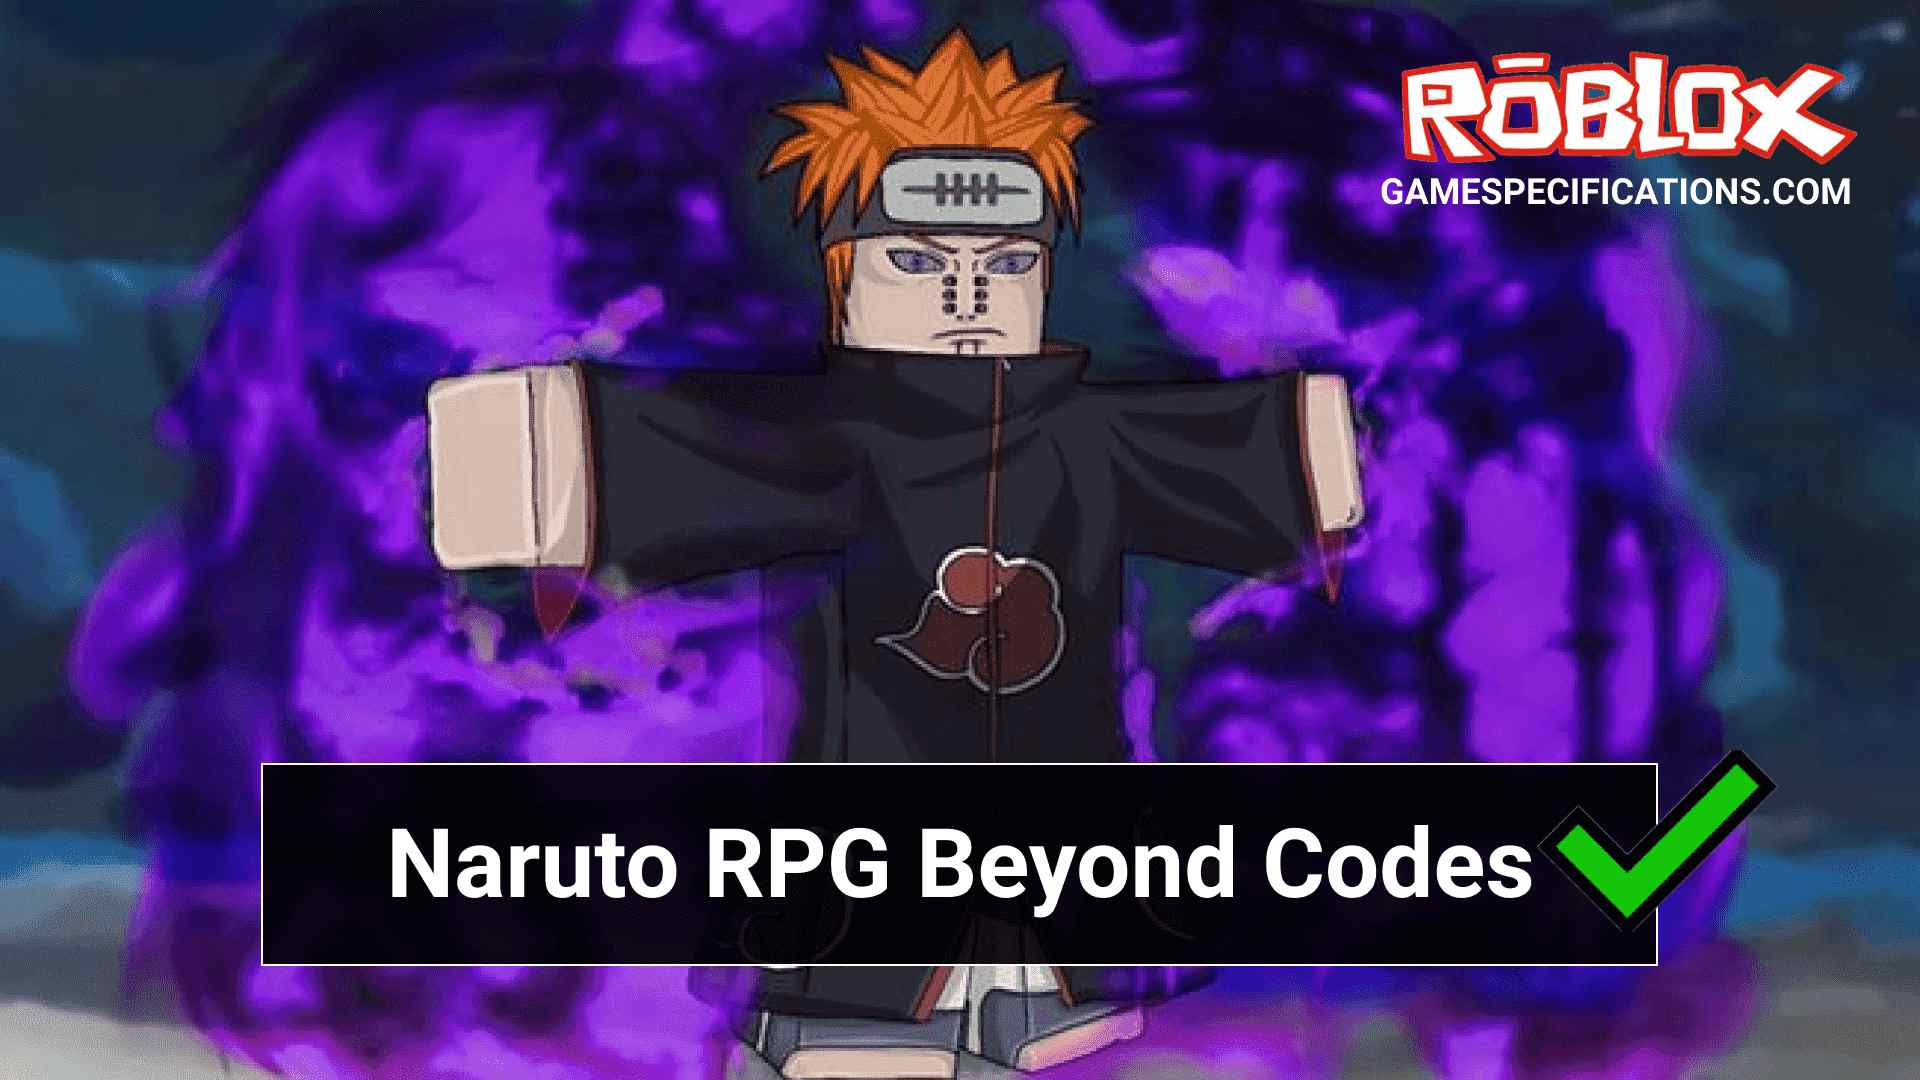 11 Roblox Naruto Rpg Beyond Codes For Free Spins July 2021 Game Specifications - rpg adventures roblox codes